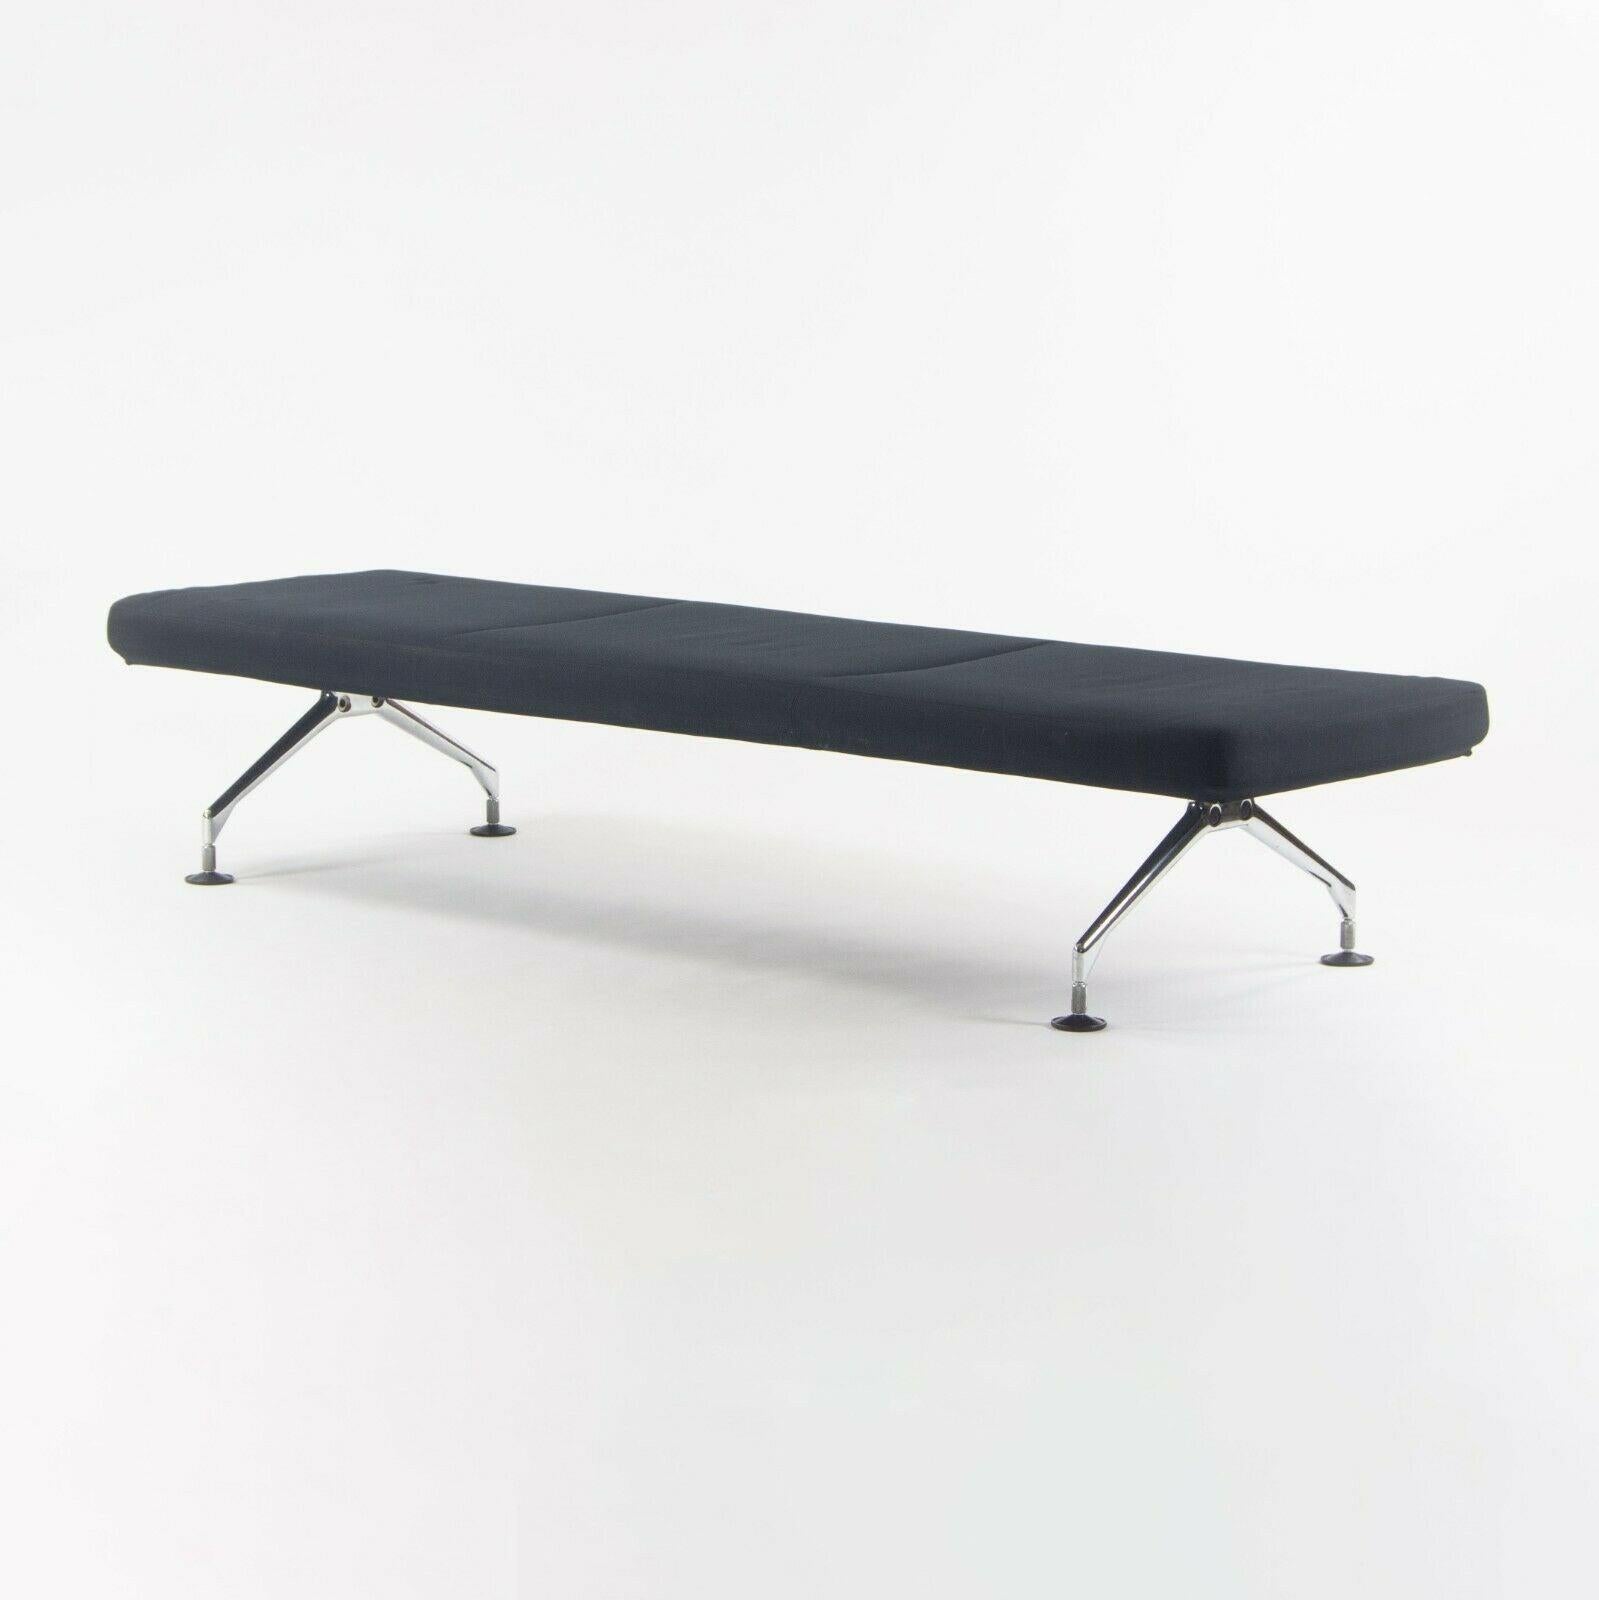 Swiss 1989 Antonio Citterio for Vitra Area Montage Daybed Bench Sofa w/ Black Fabric For Sale